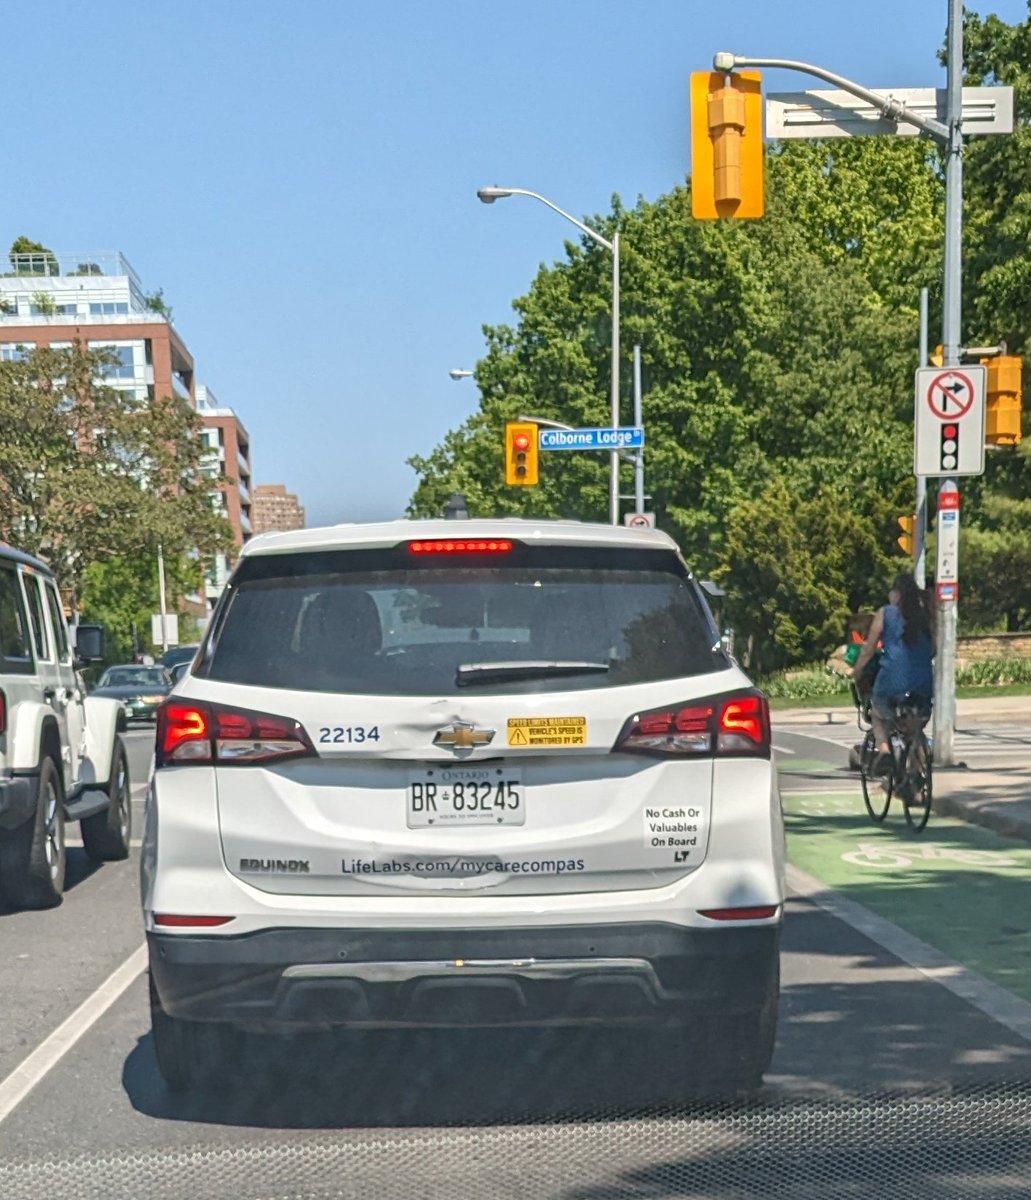 @LifeLabs Hope you provide better services than your drivers. Your driver cut me off on Bloor Street this afternoon.